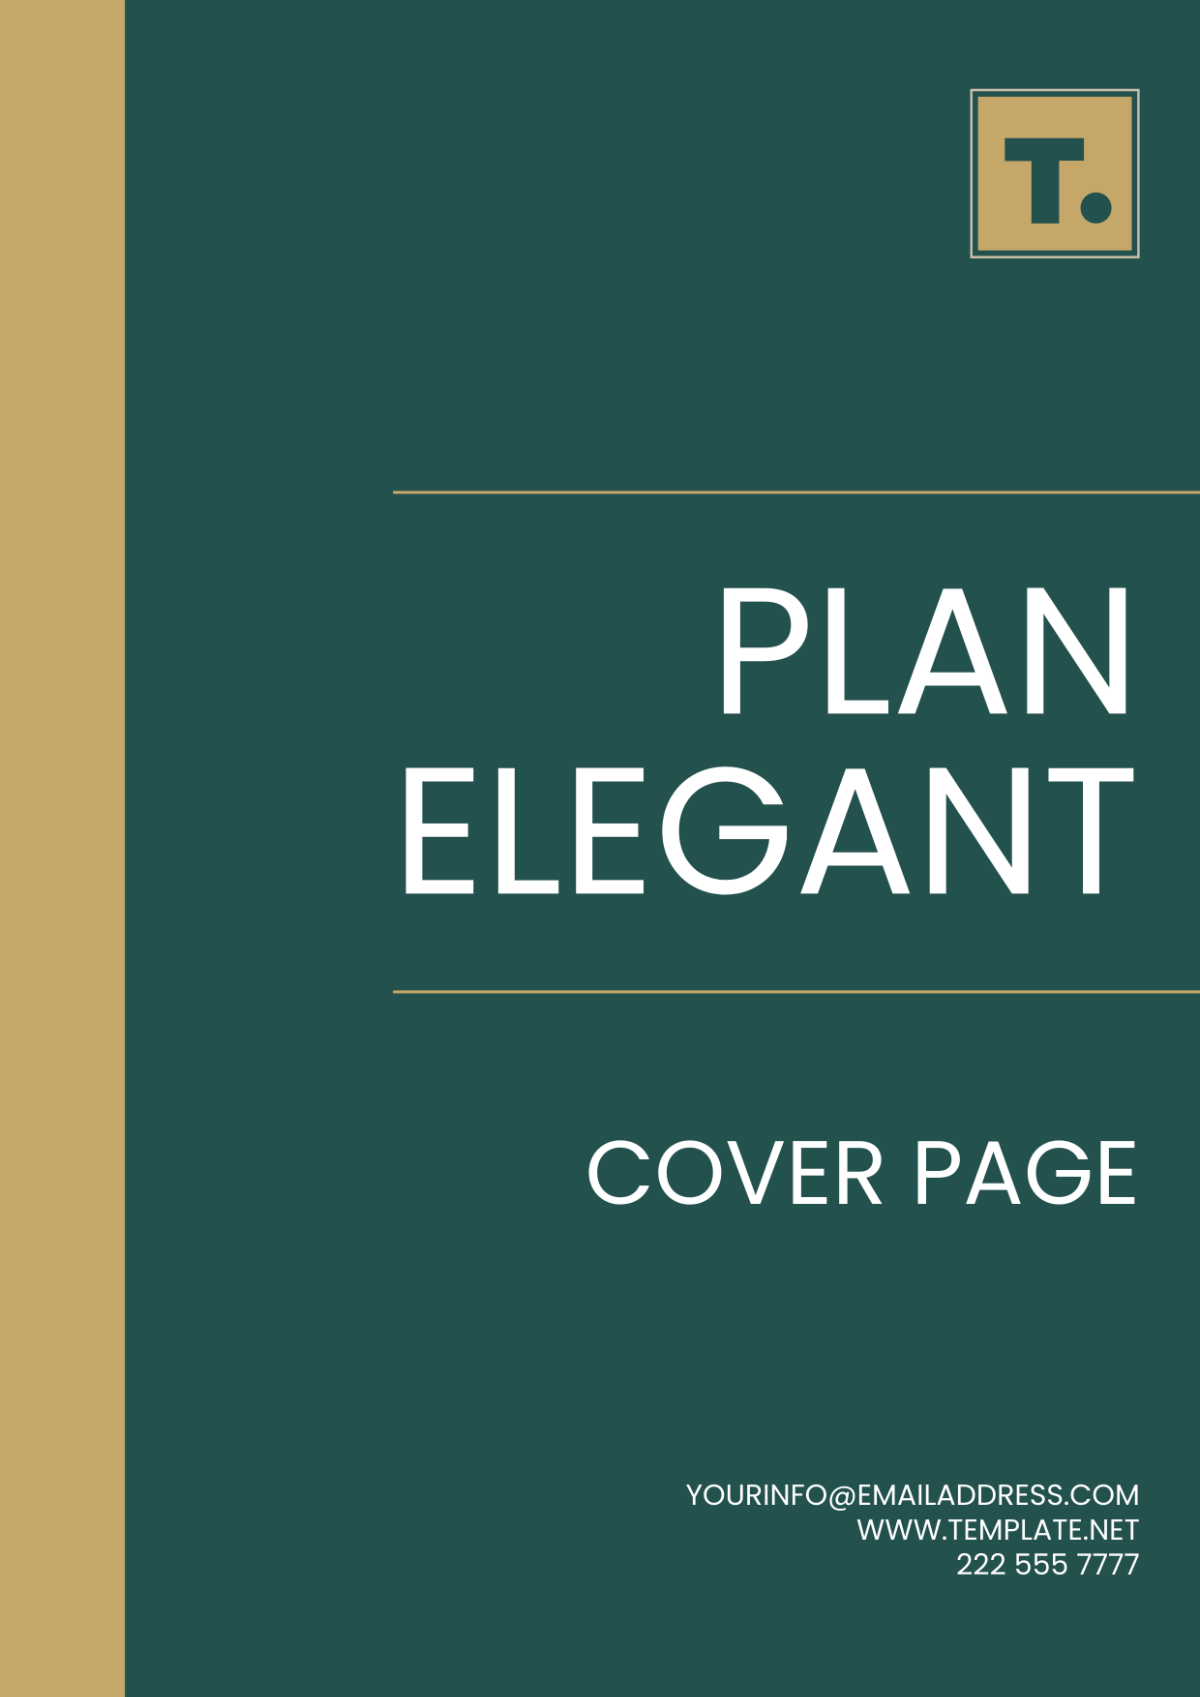 Free Plan Elegant Cover Page Template